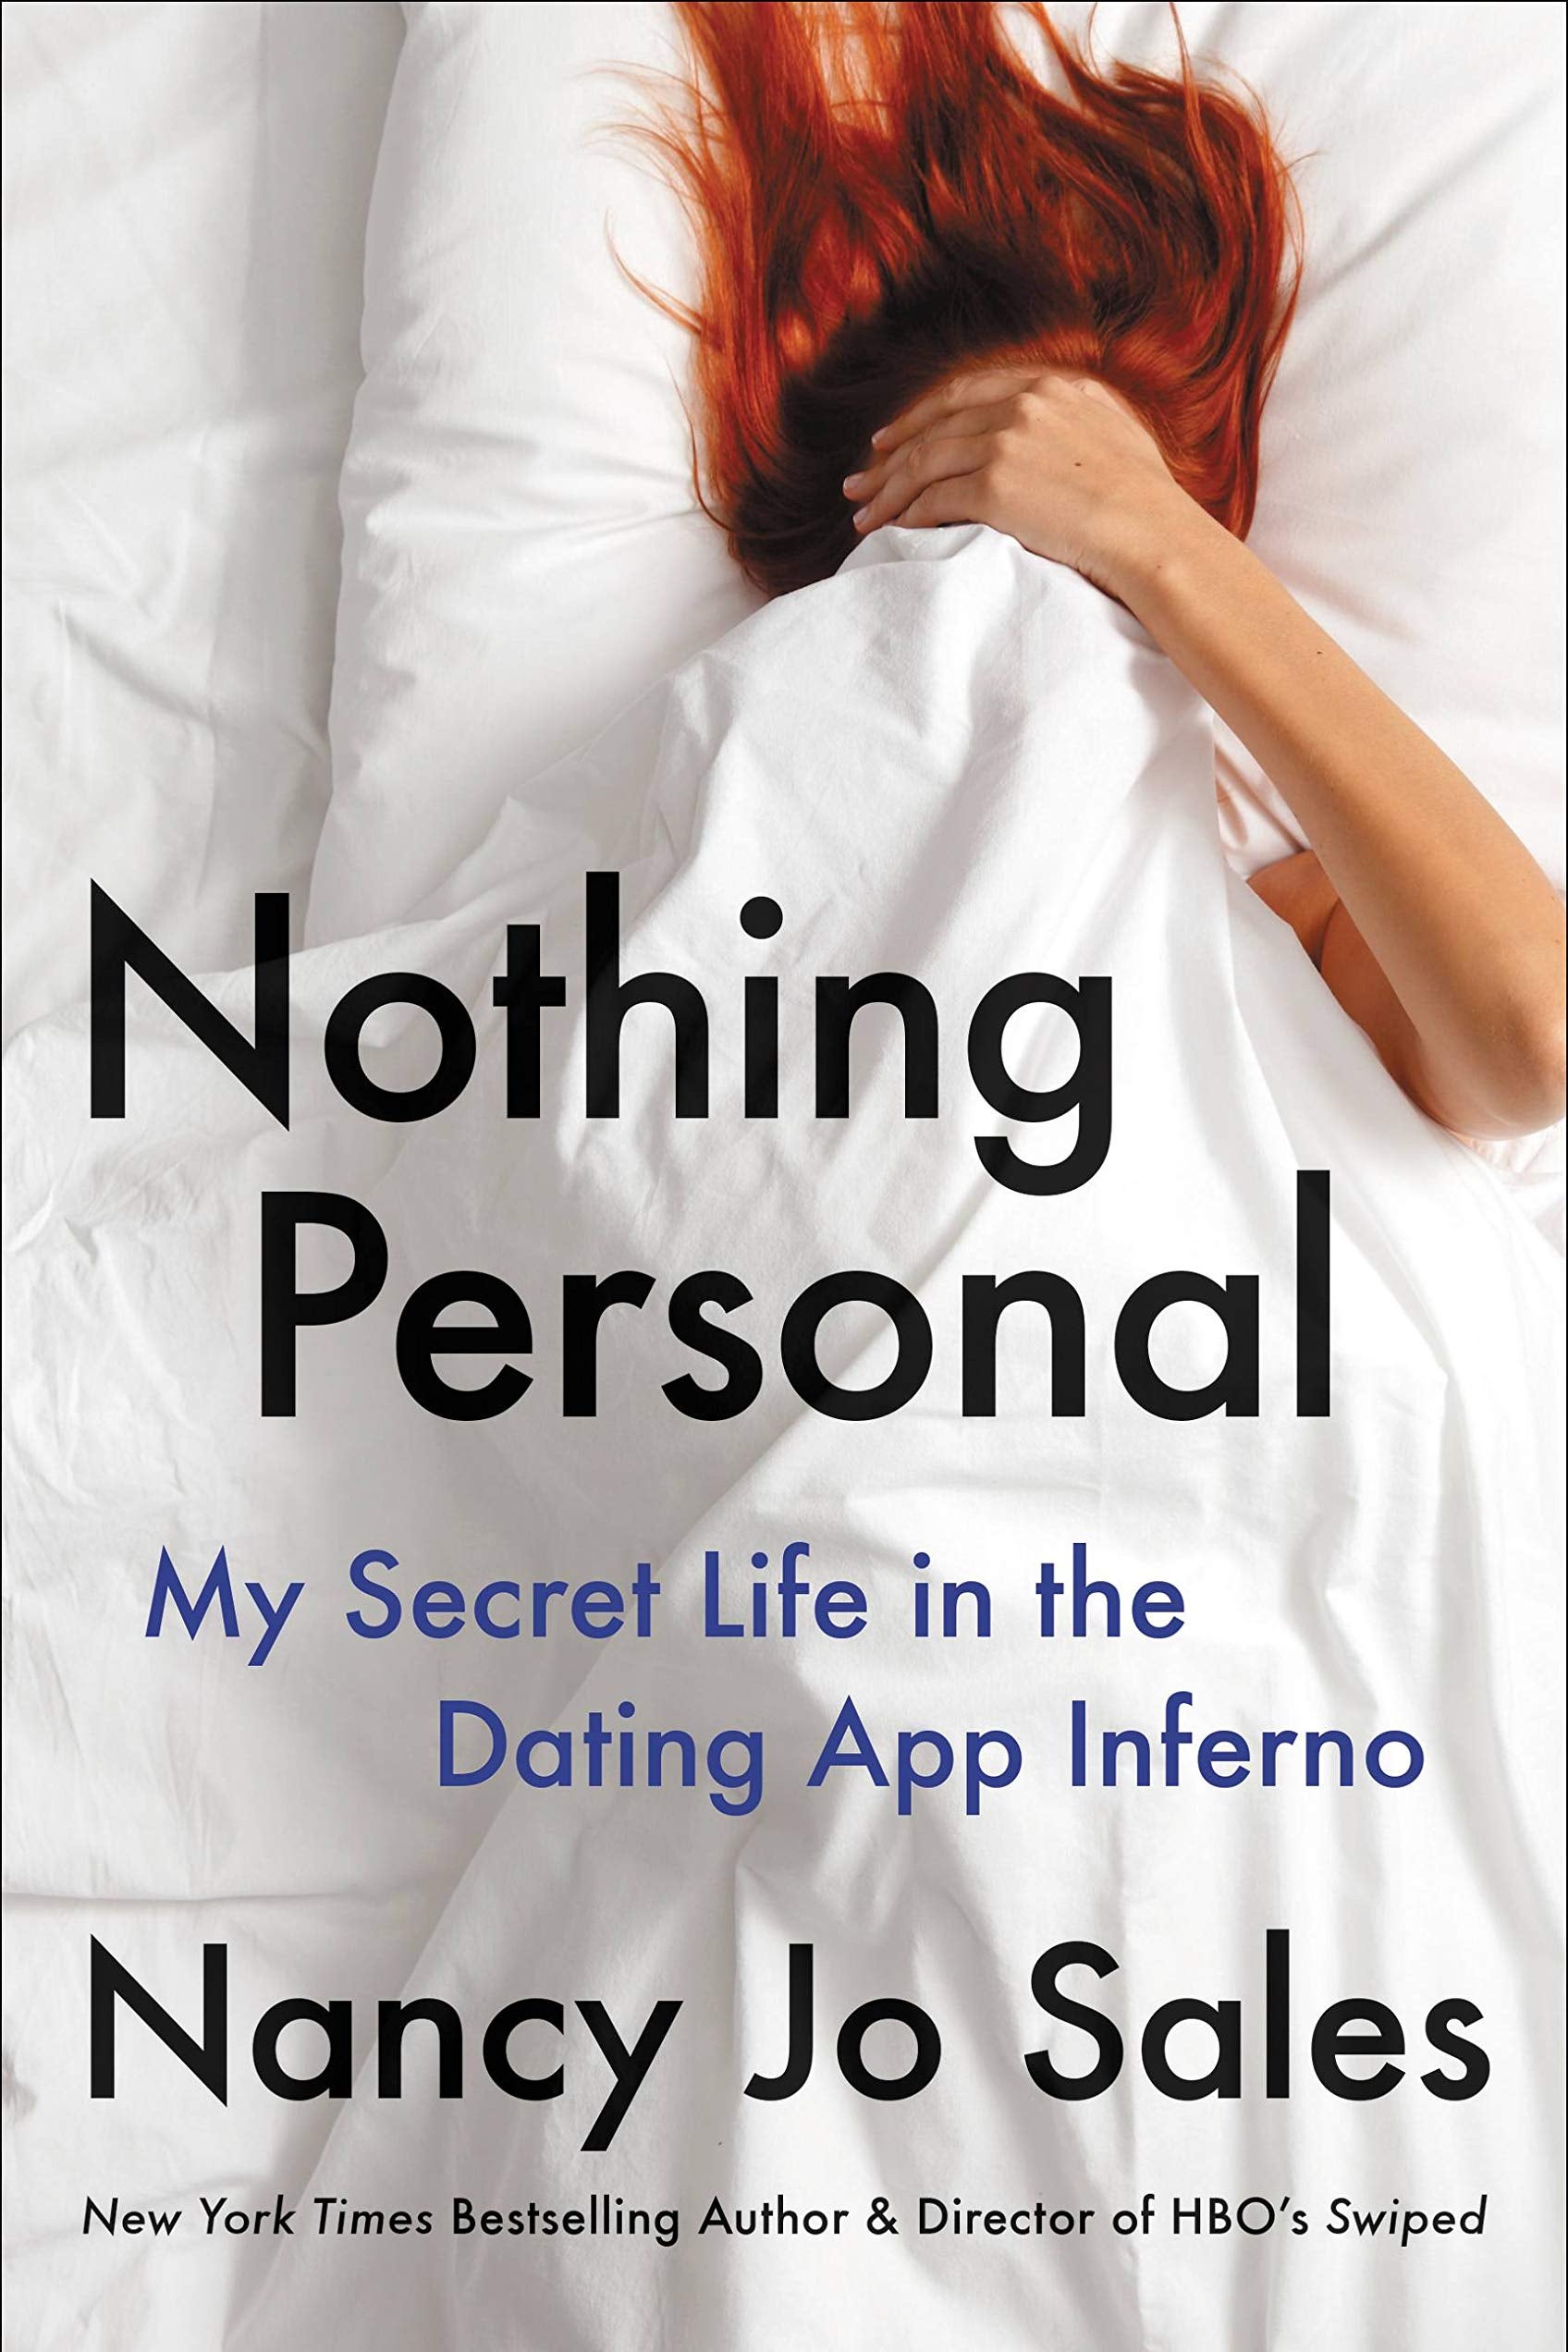 A book cover with a red-haired woman lying between white sheets. She is covering her face with the sheets. 